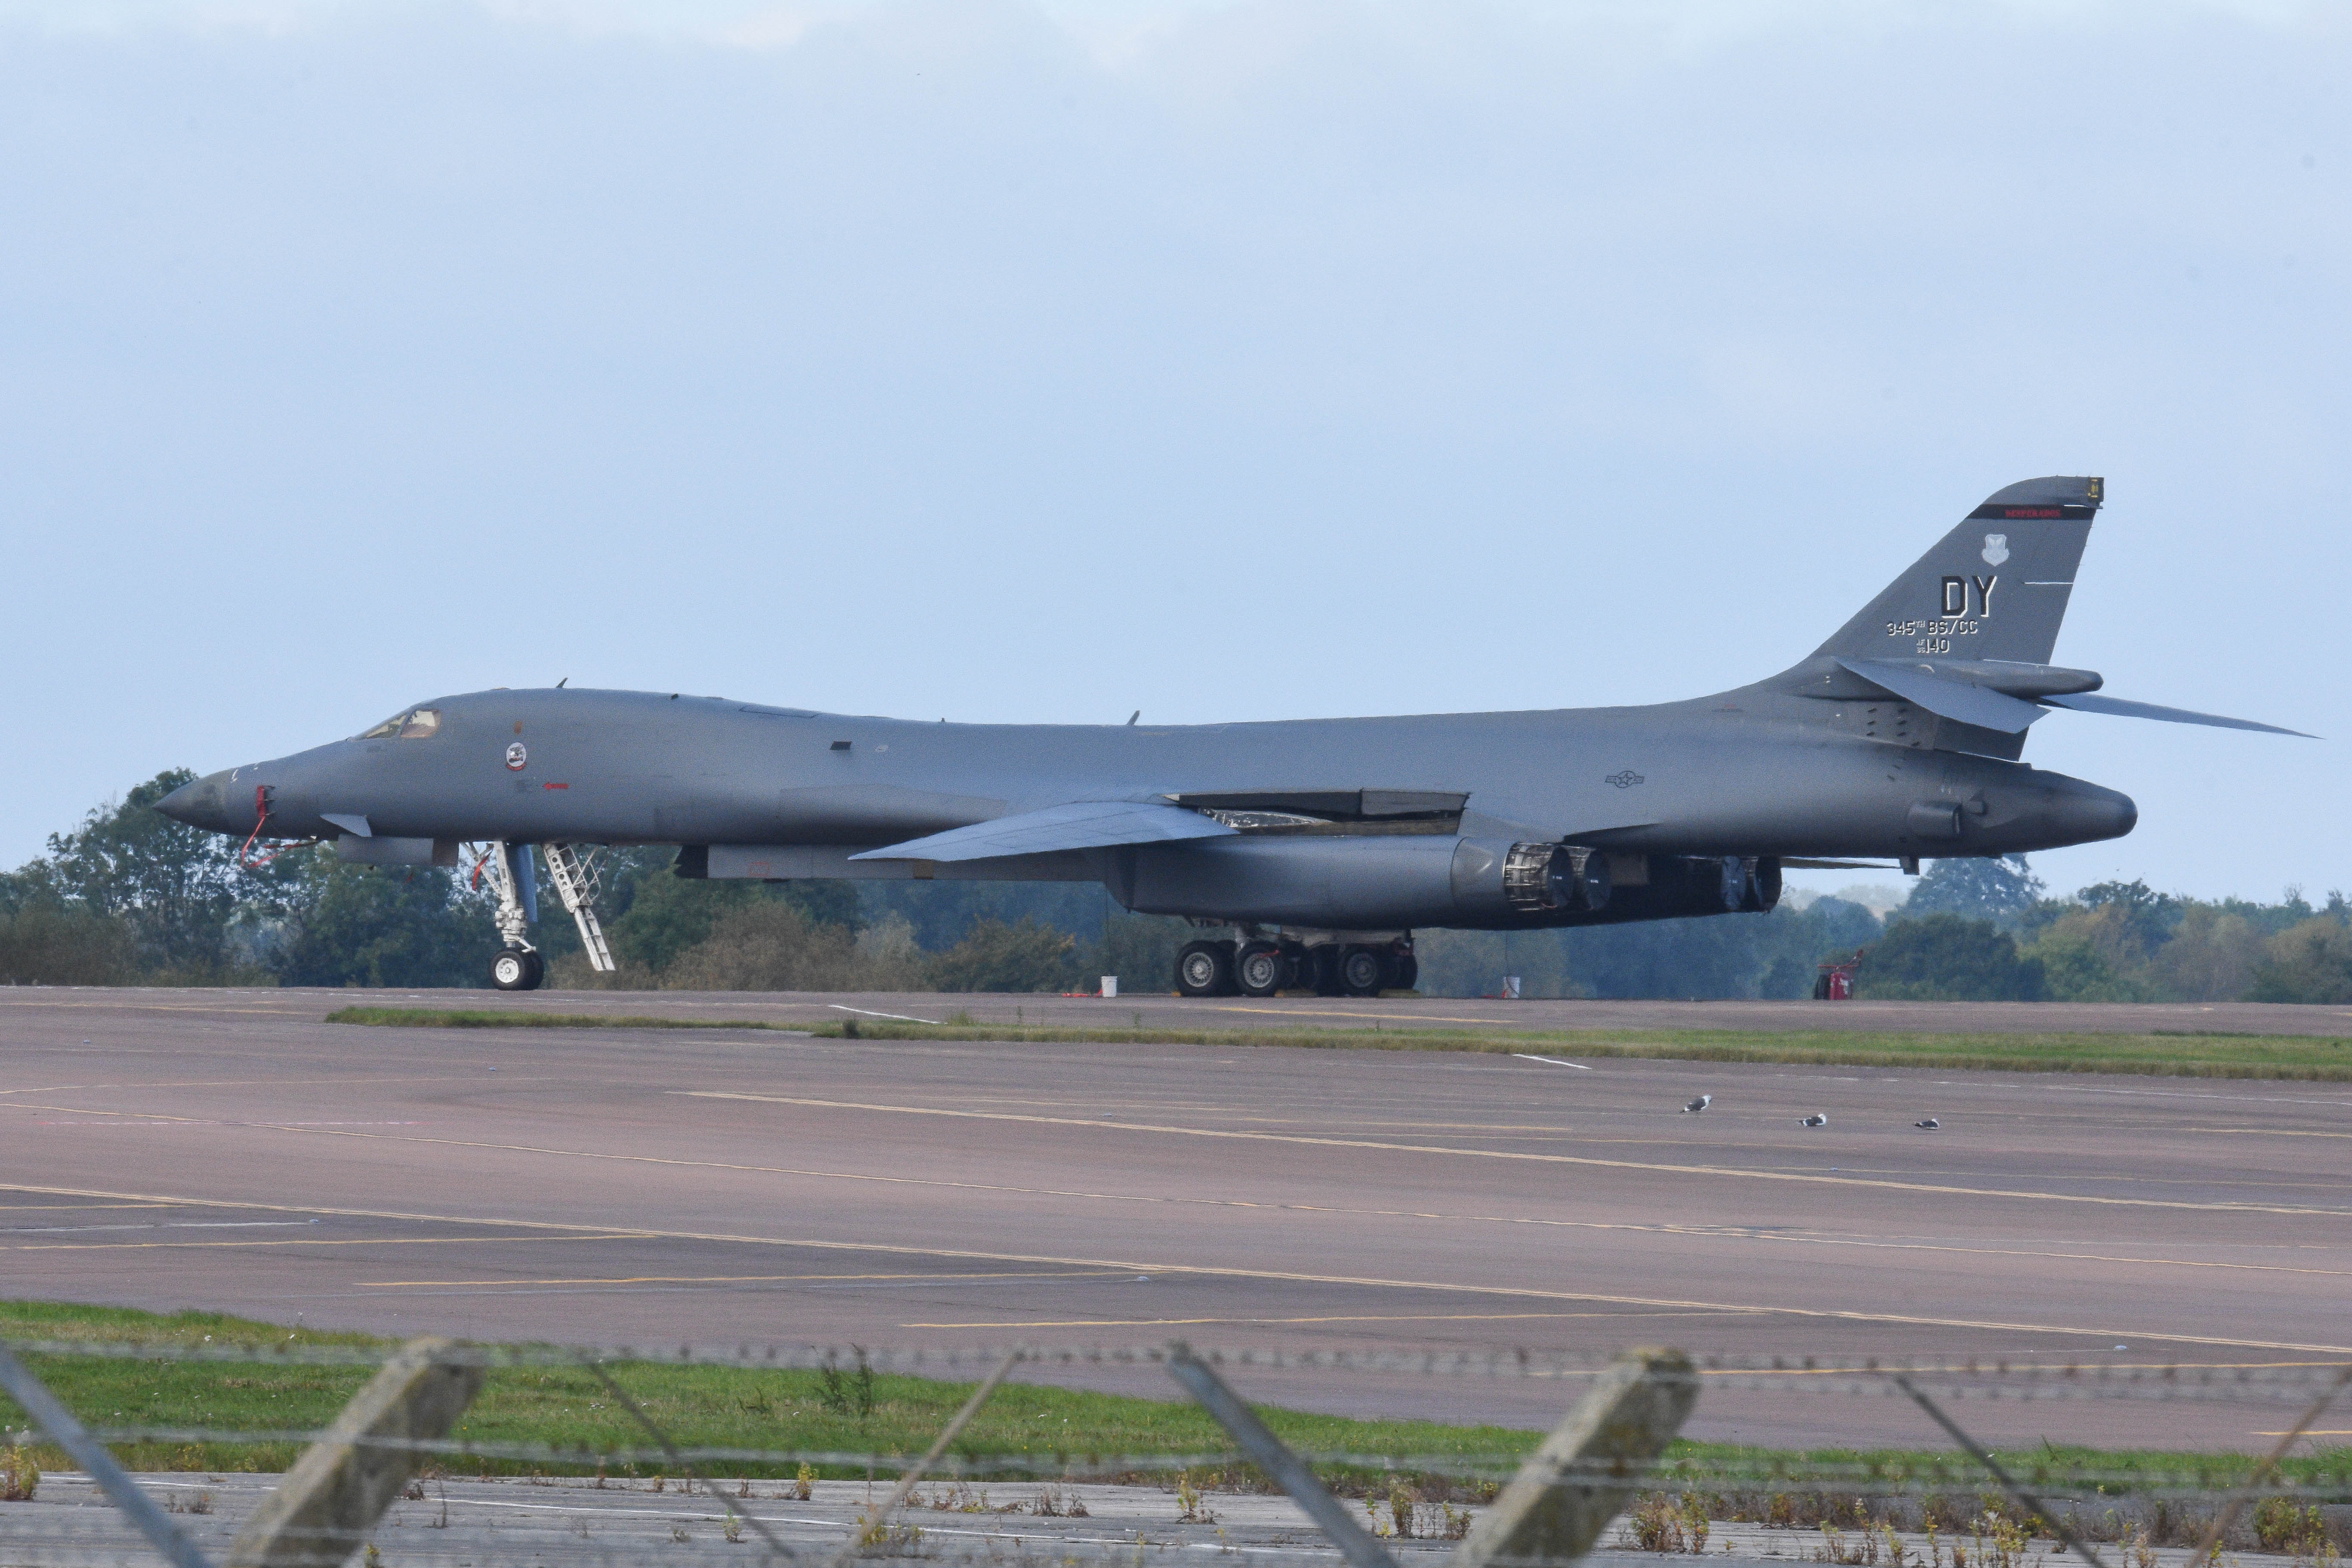 86-0140/860140 USAF - United States Air Force Rockwell B-1B Lancer Photo by colinw - AVSpotters.com